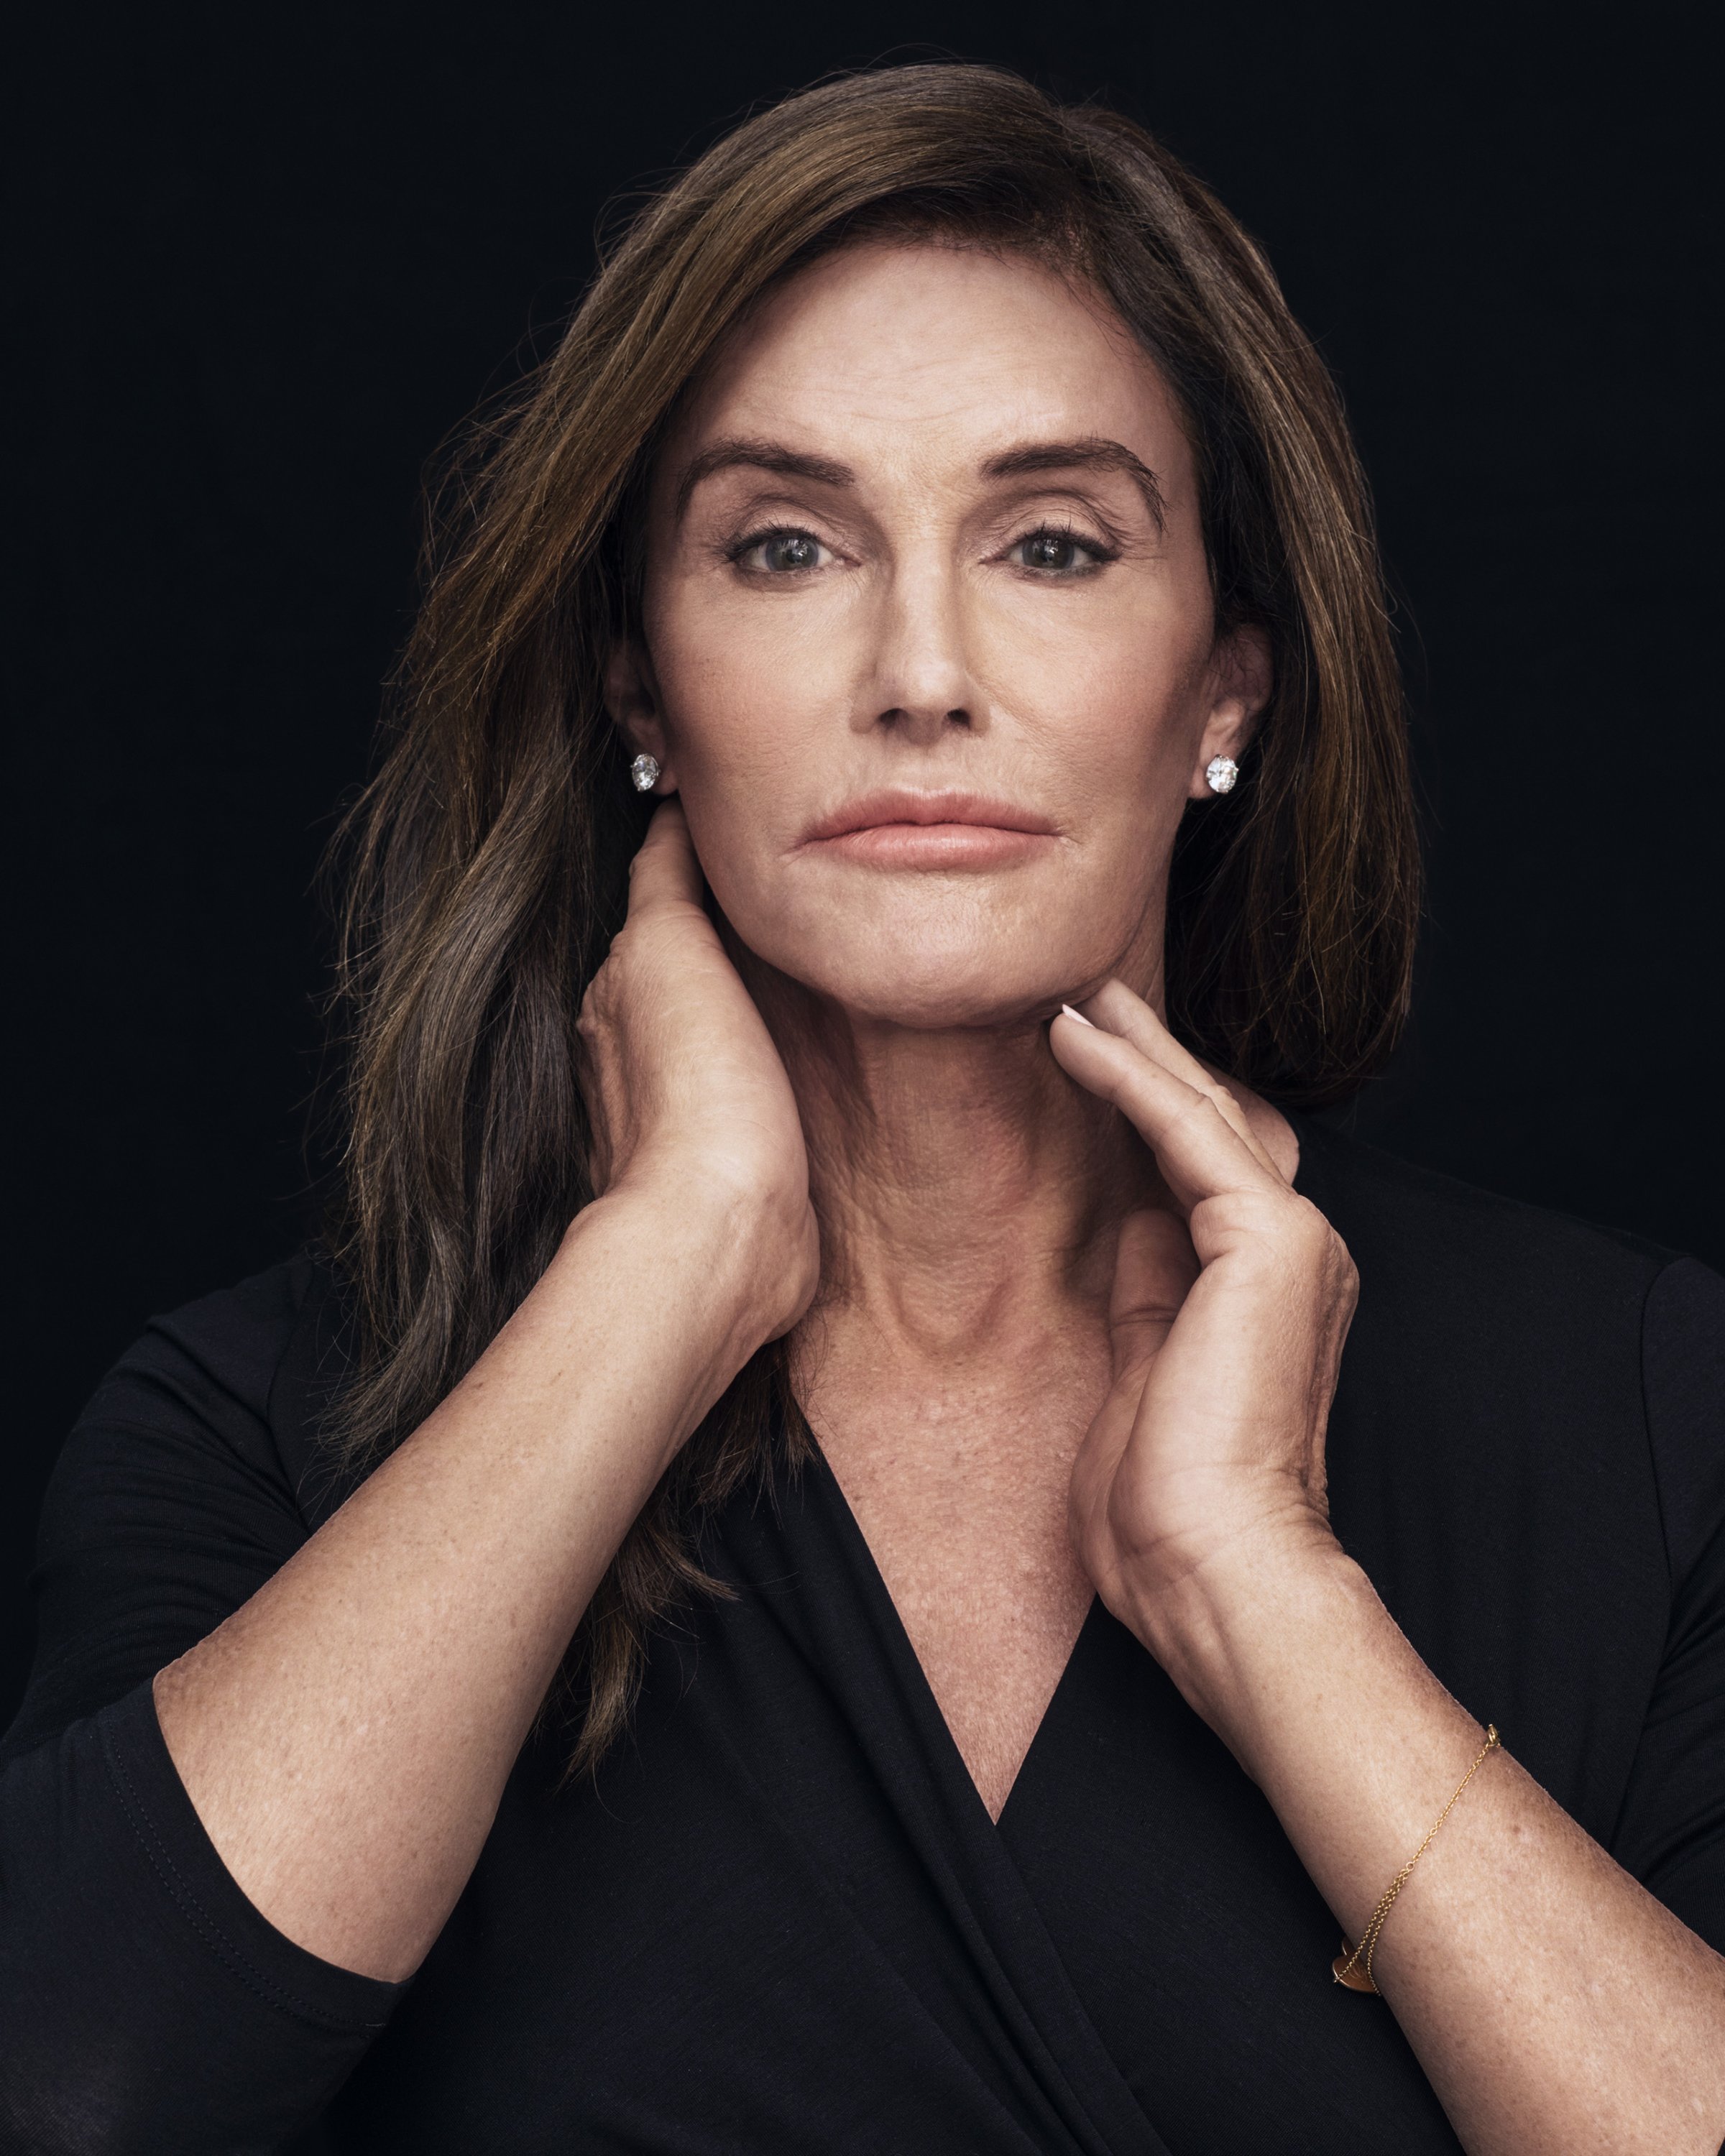 Caitlyn Jenner photographed at the Trump Tower in New York City on Monday November 9th 2015